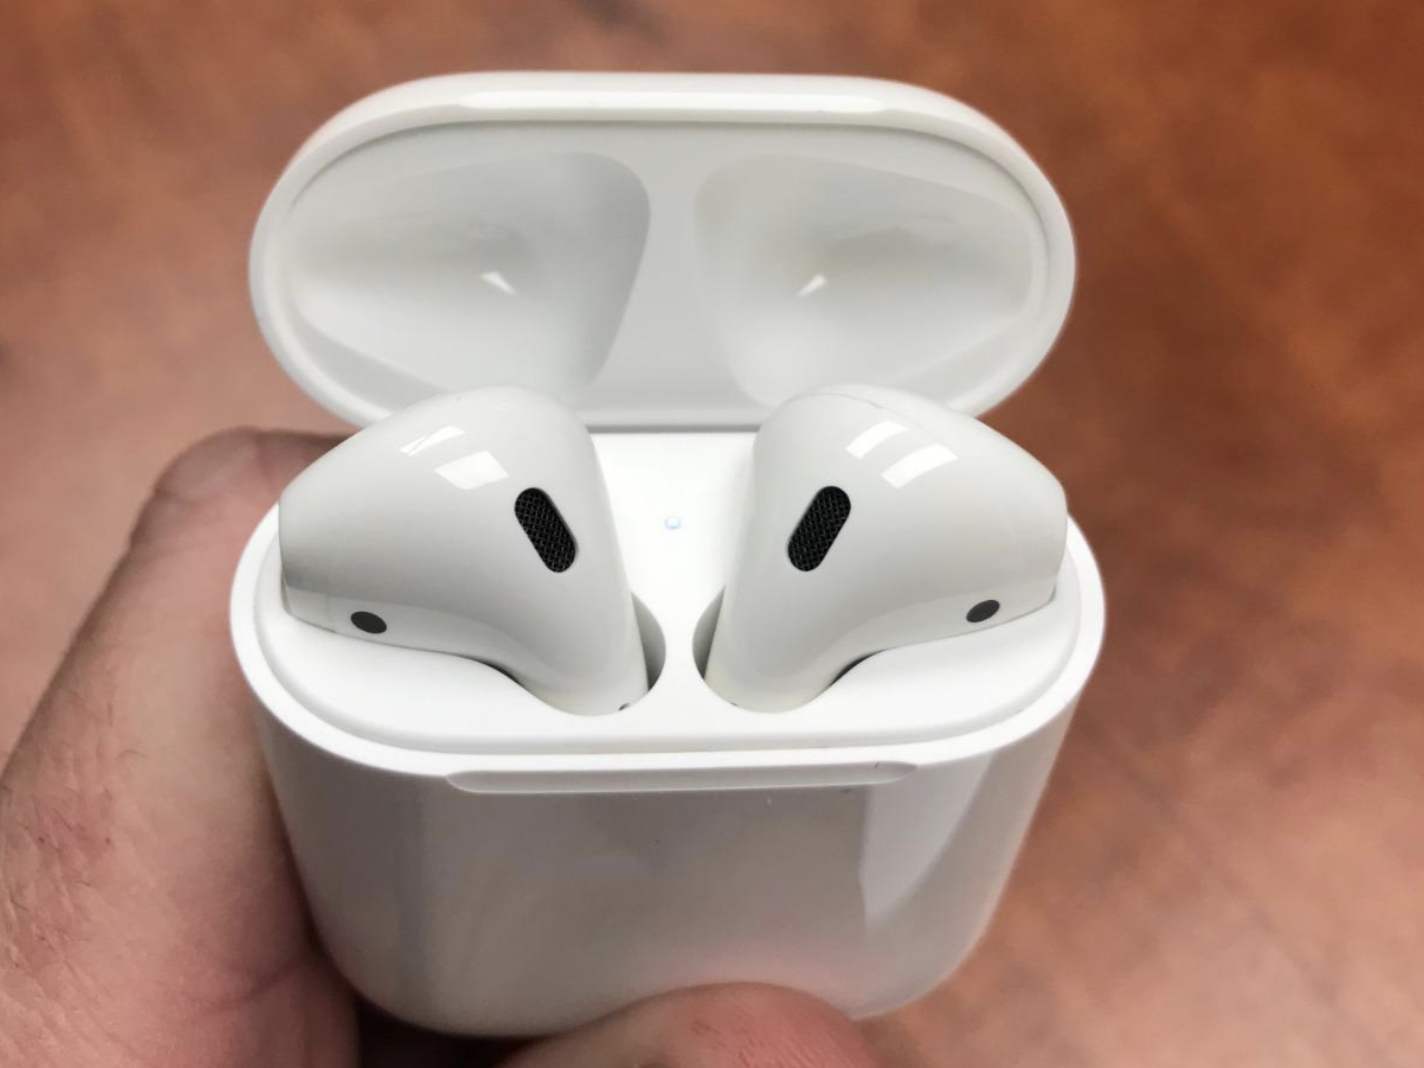 reviewer holding white airpods in white charging case